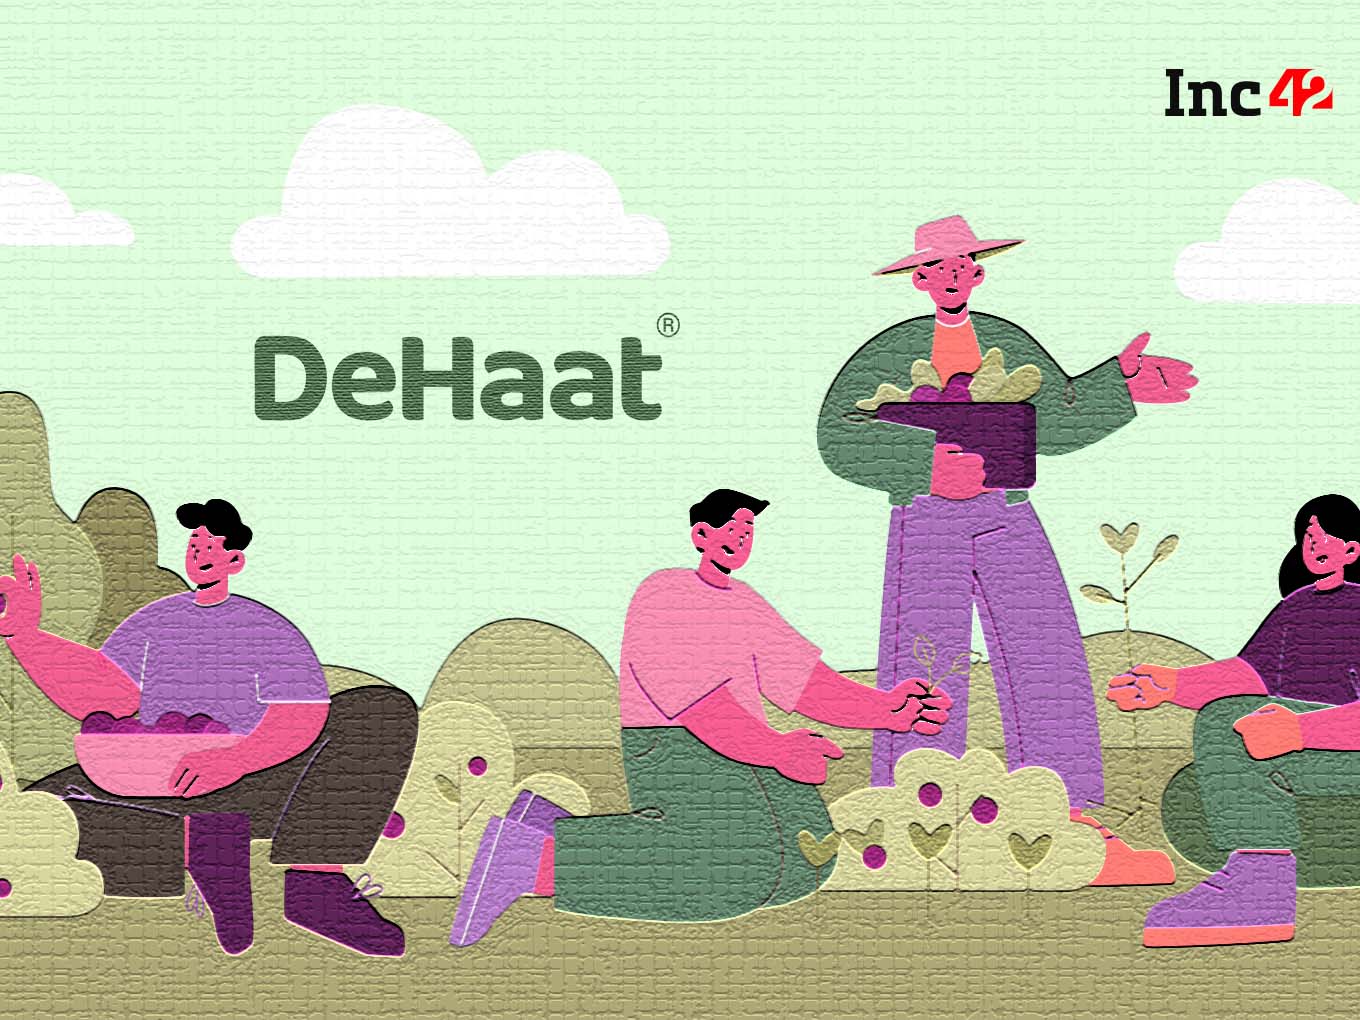 Agritech Startup DeHaat’s Losses Widen By 3X, Earnings Jump 186% To INR 358 Cr In FY21